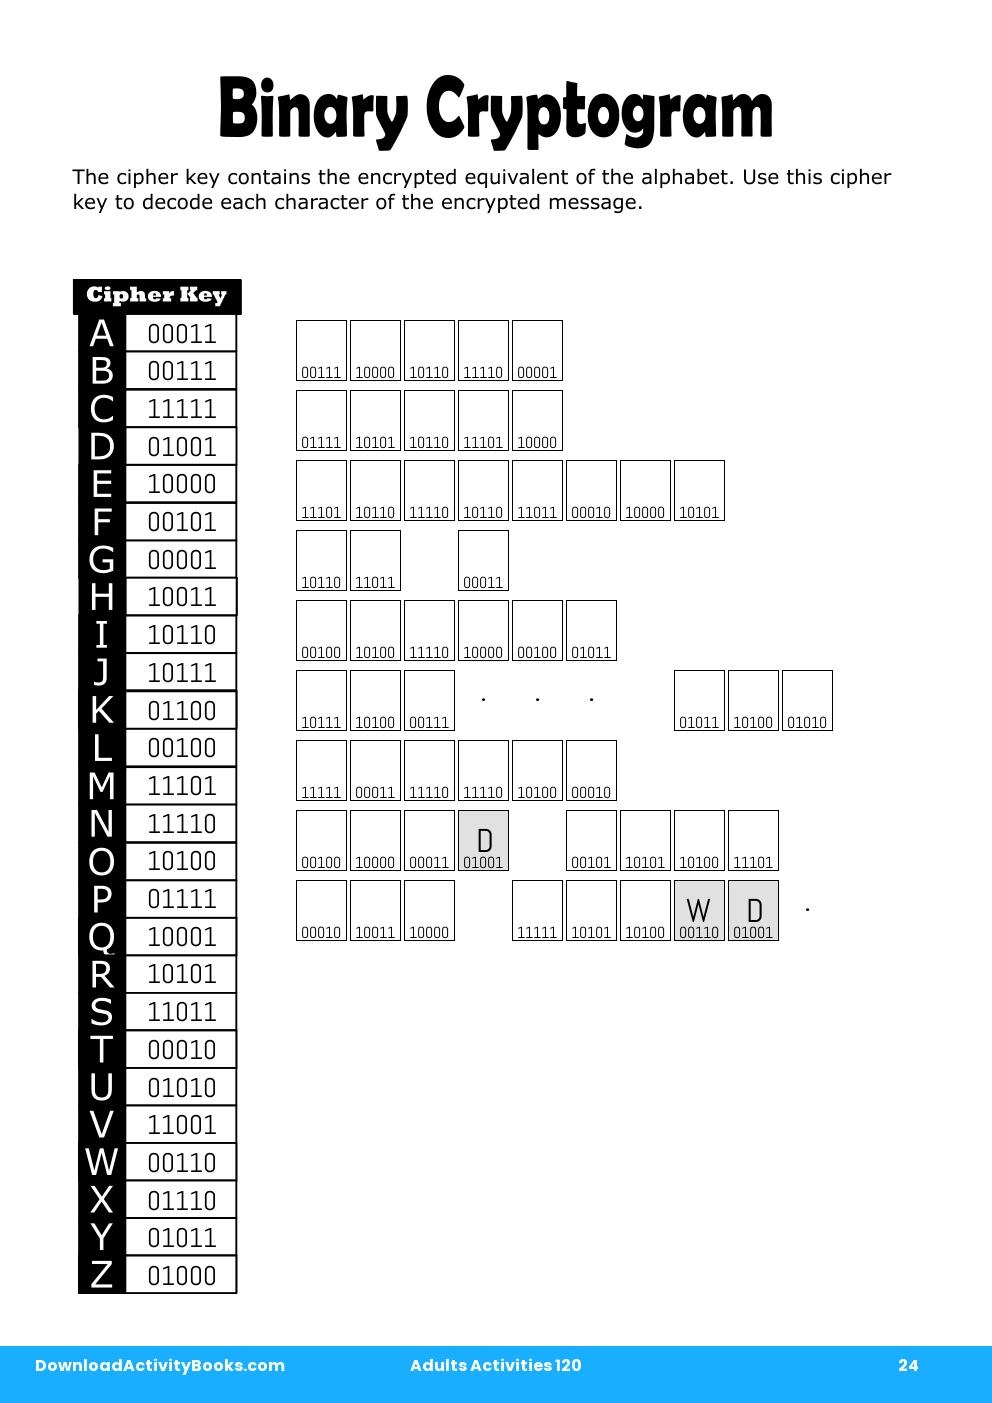 Binary Cryptogram in Adults Activities 120